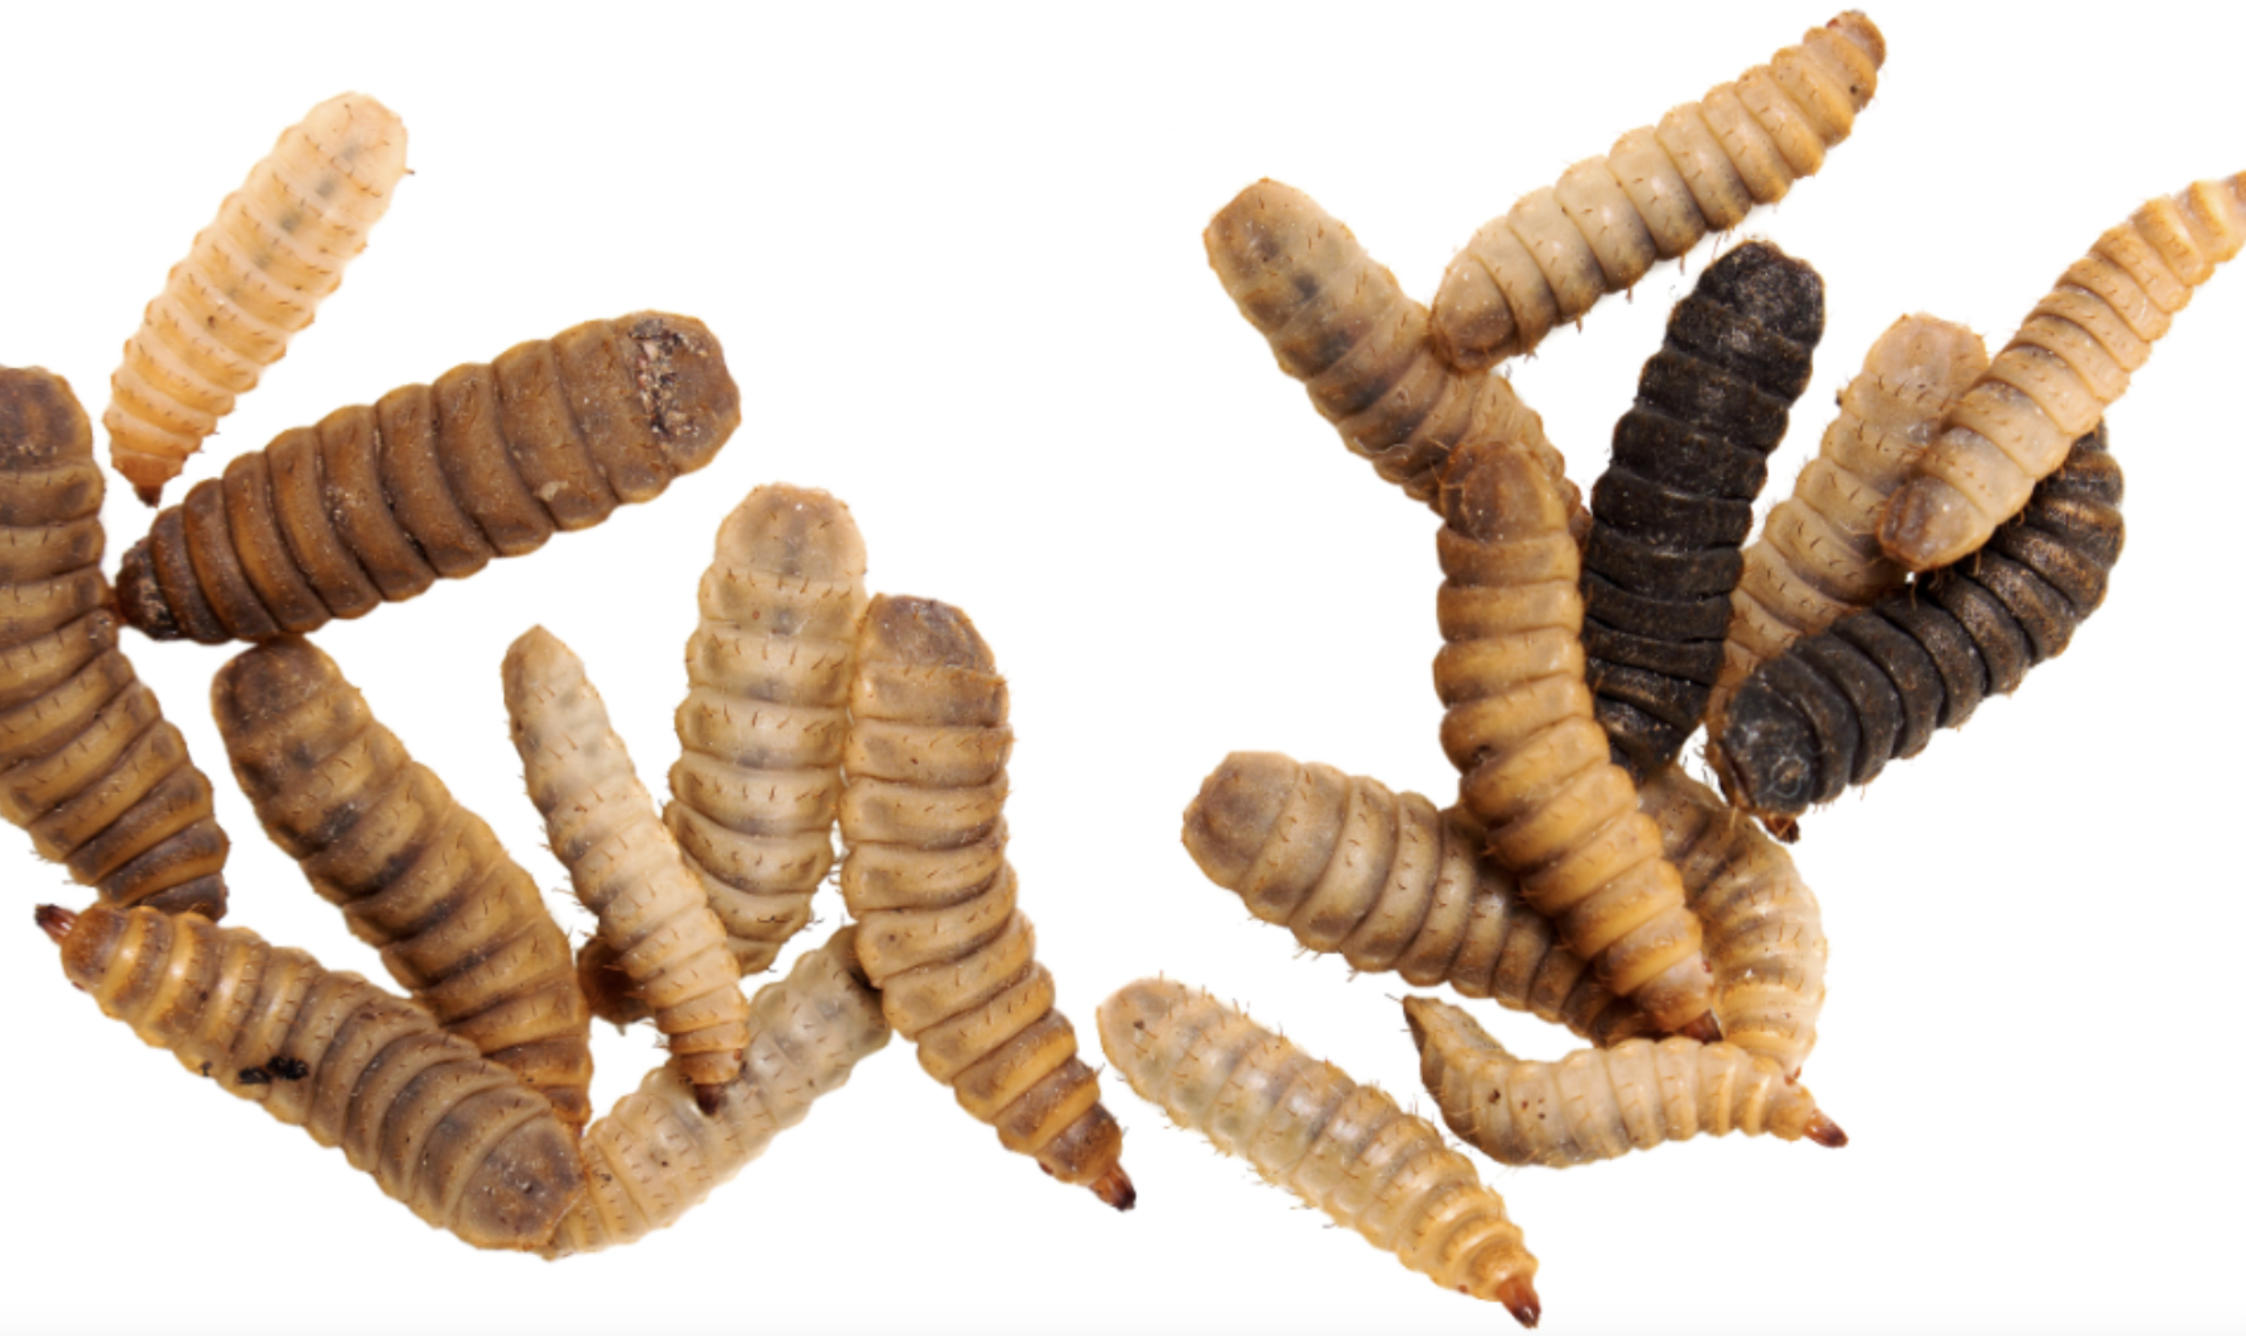 Livin Farms develops automated technology that upcycles waste into feed for insect protein